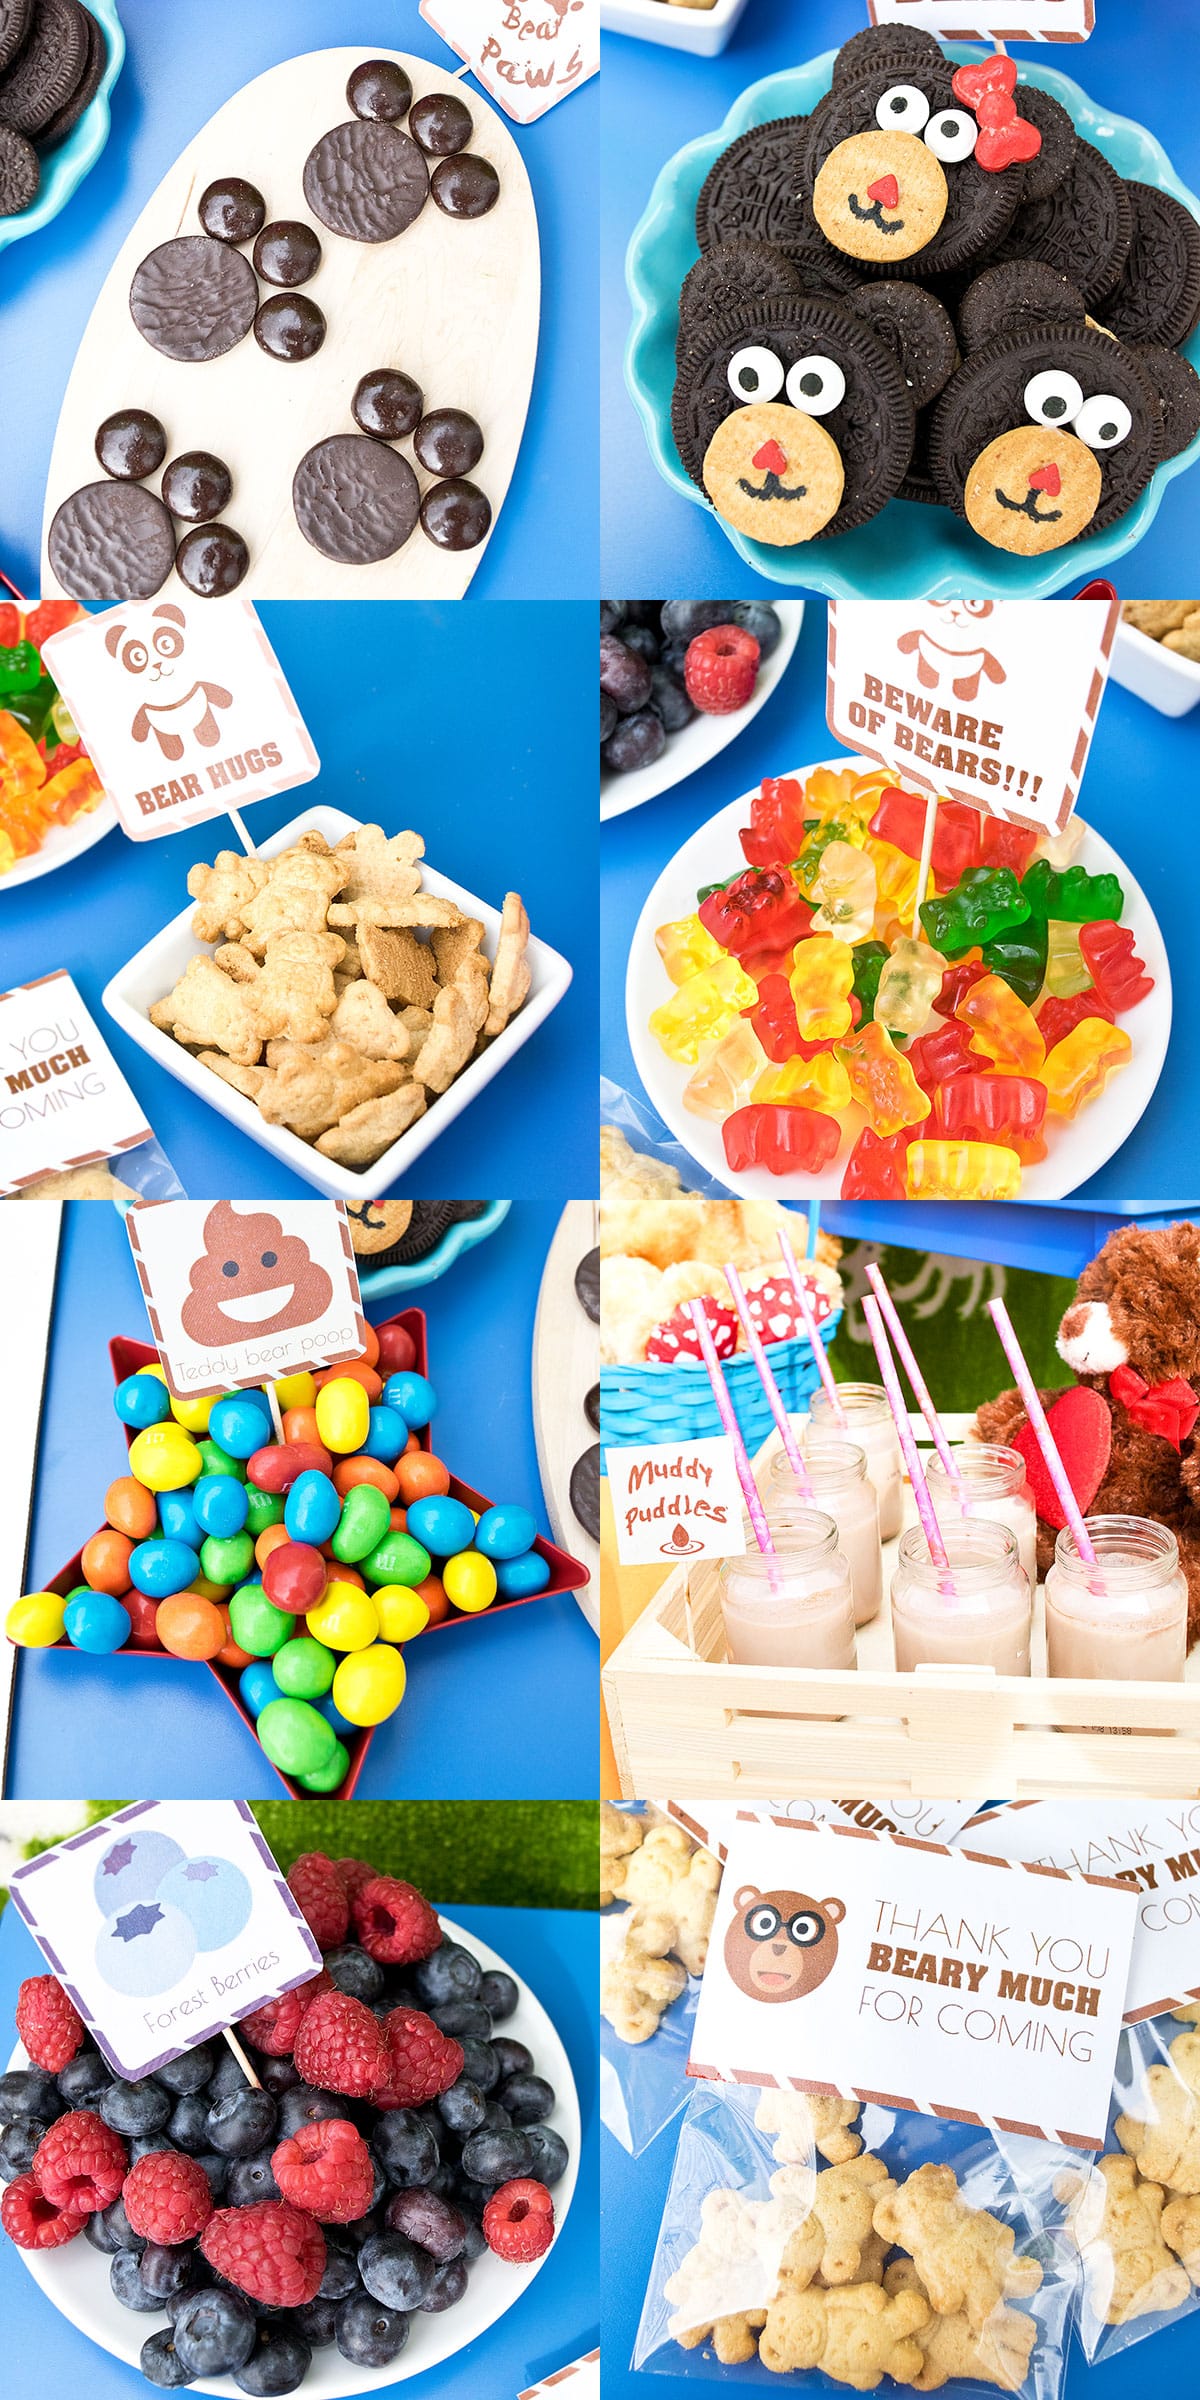 Collage Image With Teddy Bear Dessert Table Party Food. 